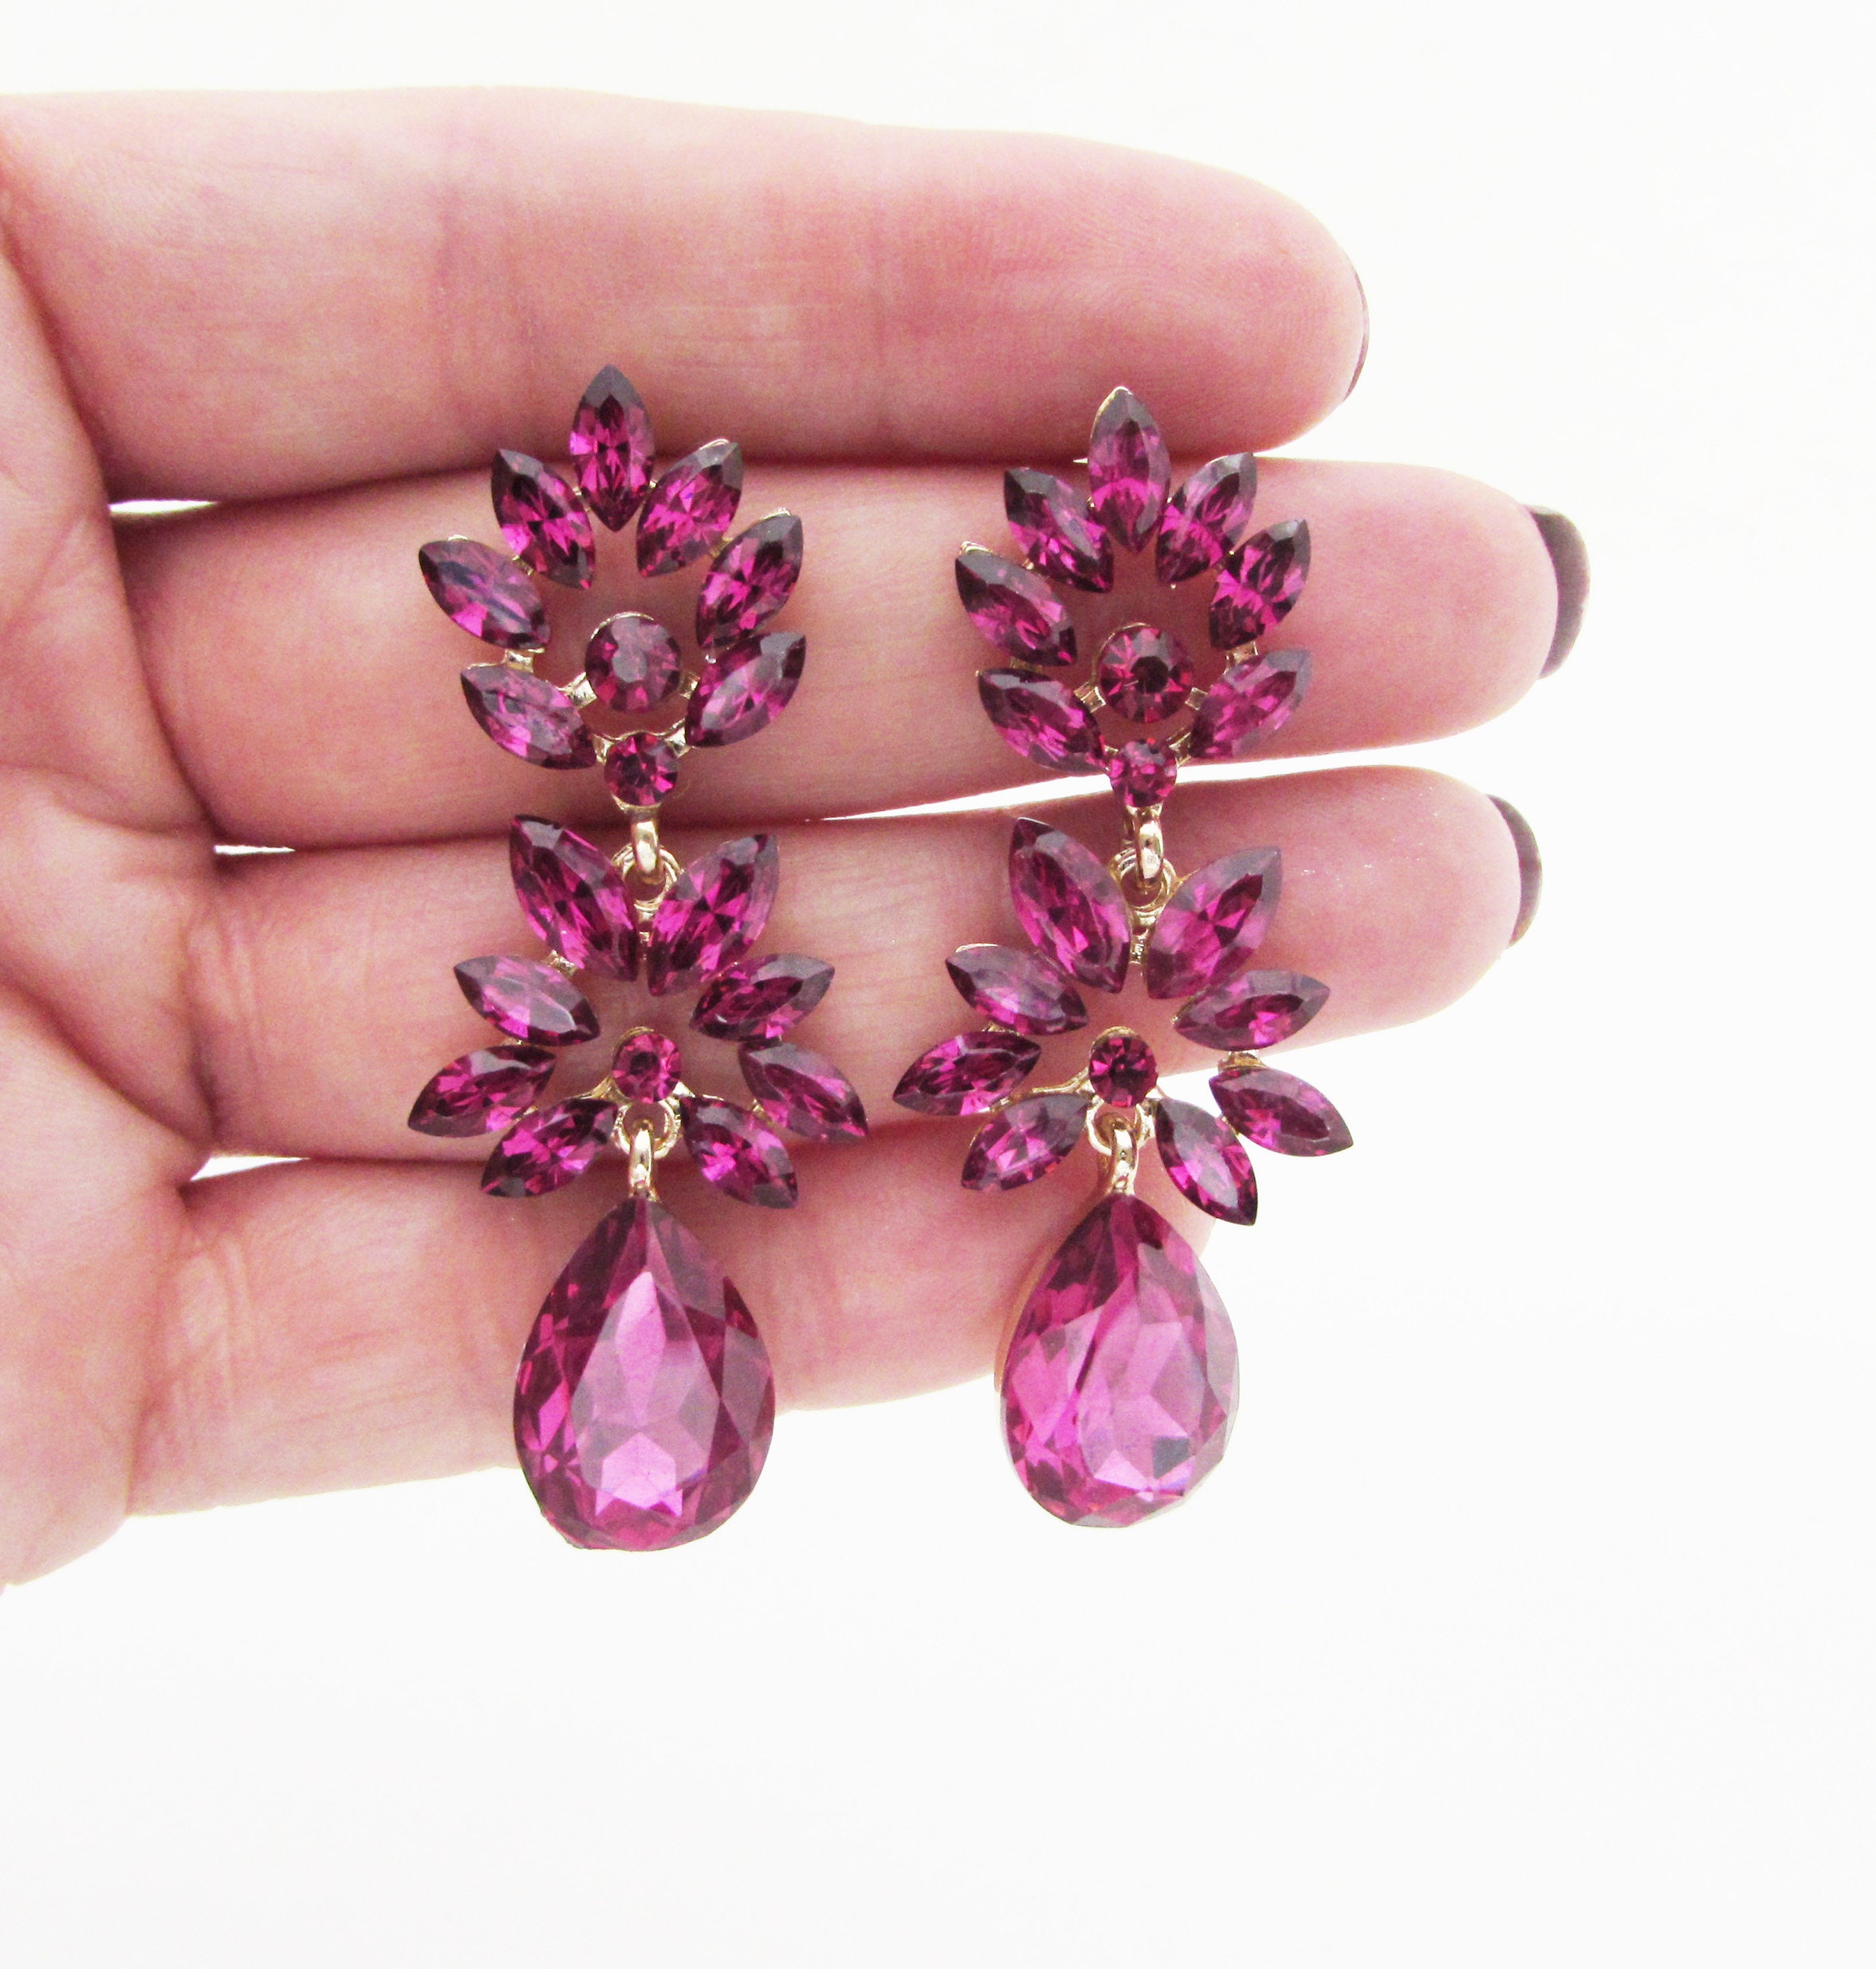 Buy Dark Pink GRAPE Earrings by Lady Detalle, 16k Gold or Silver  Reproduction Victorian Pink Chalcedony Stone Grape Earrings, Handmade  Jewelry Online in India - Etsy